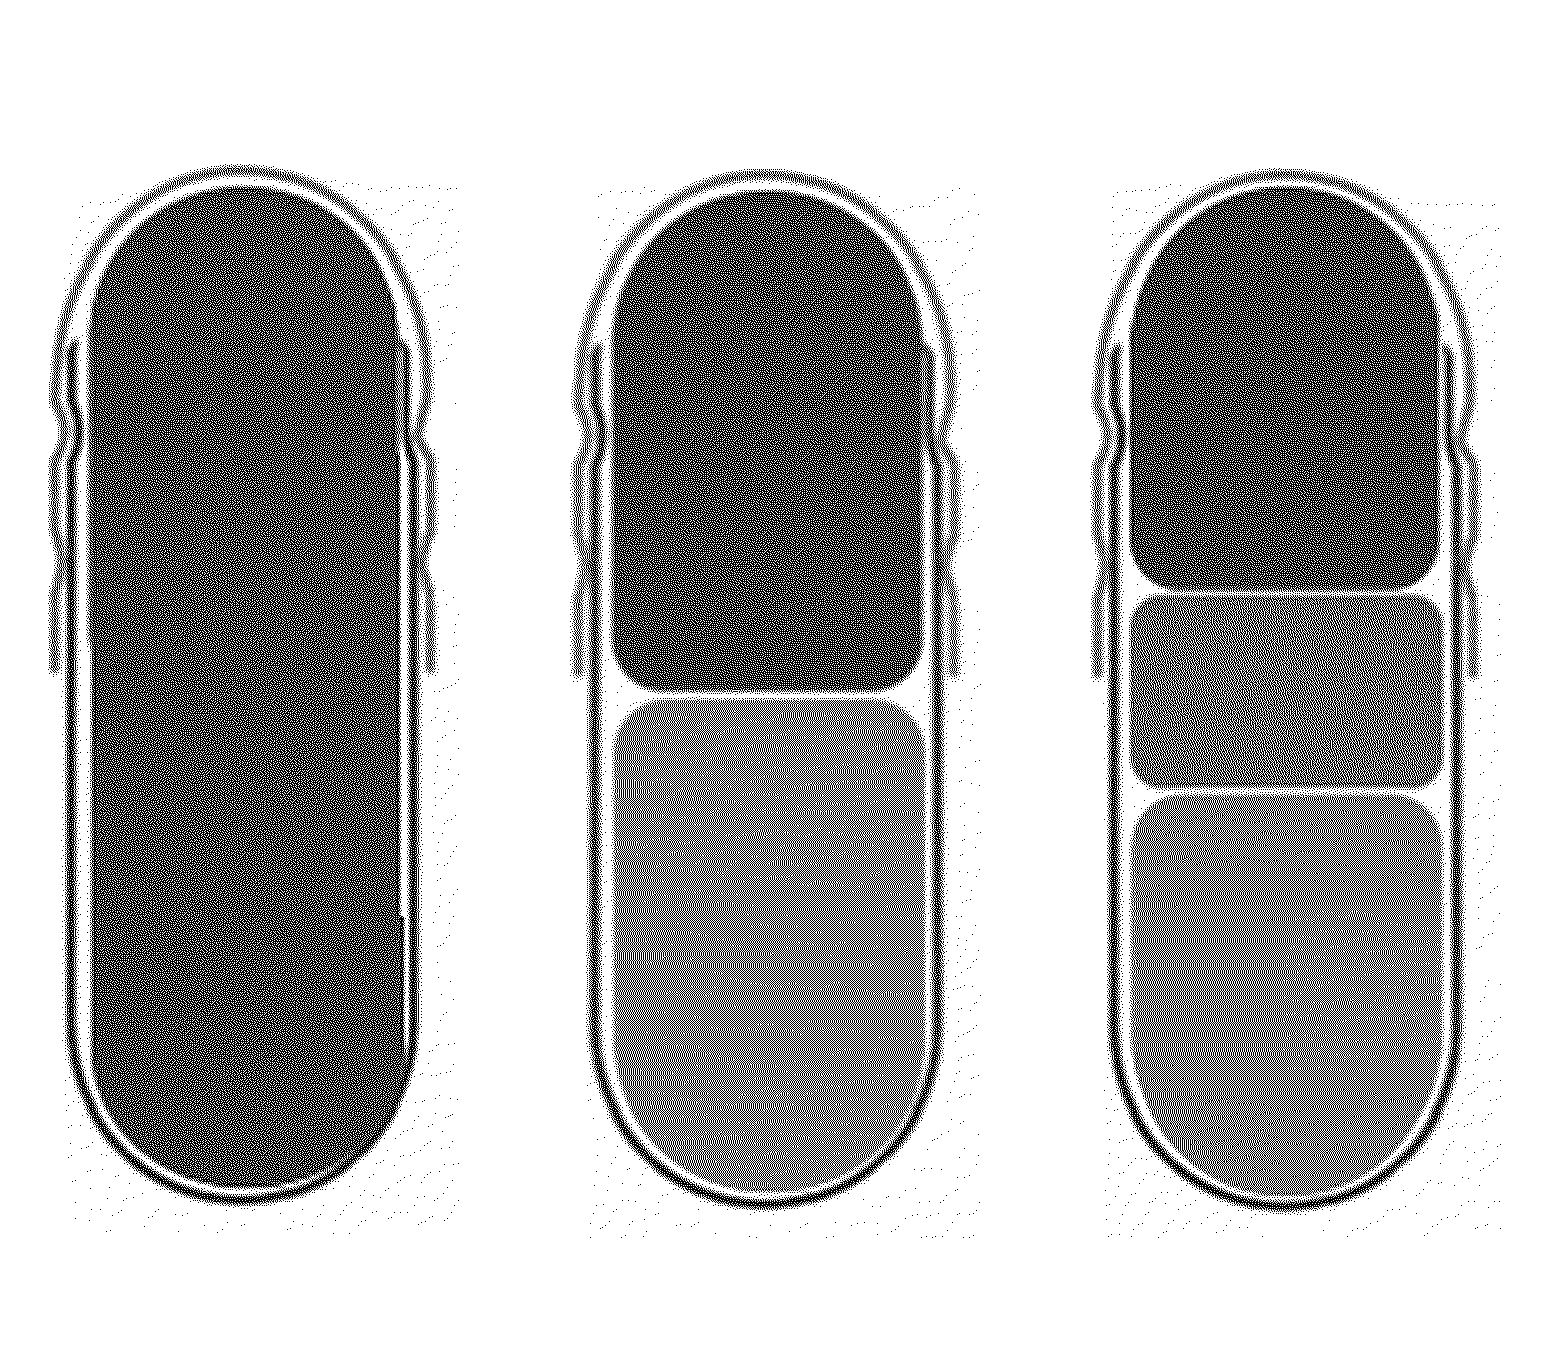 Composite formulation comprising a tablet encapsulated in a hard capsule